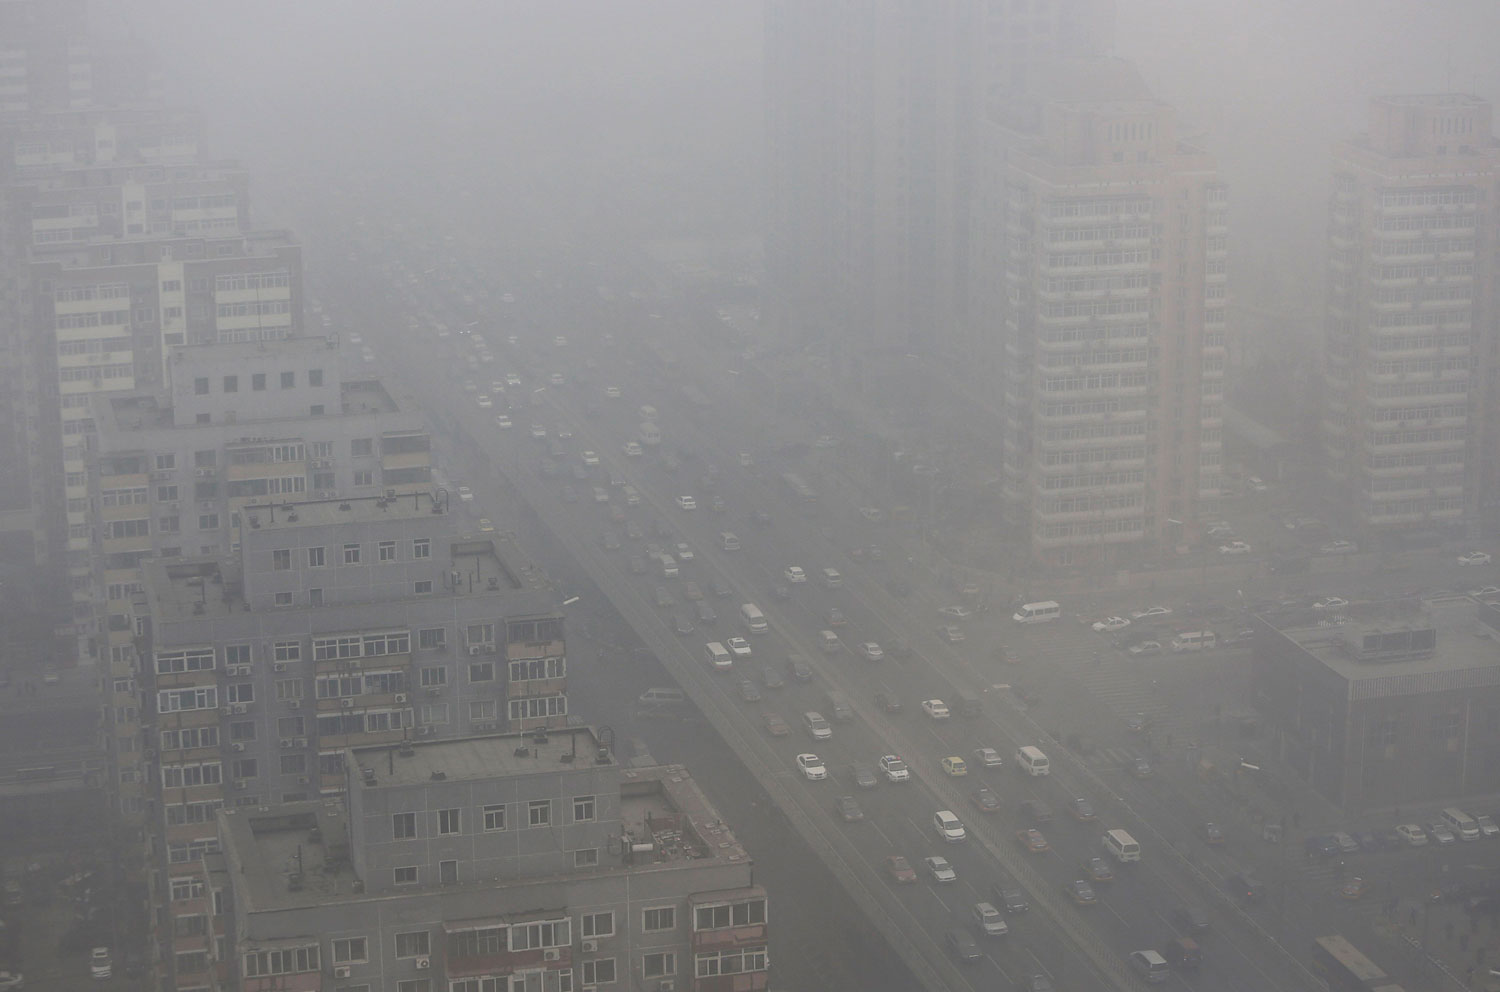 Cars drive on the Three Ring Road amid the heavy haze in Beijing, Feb. 26, 2014.